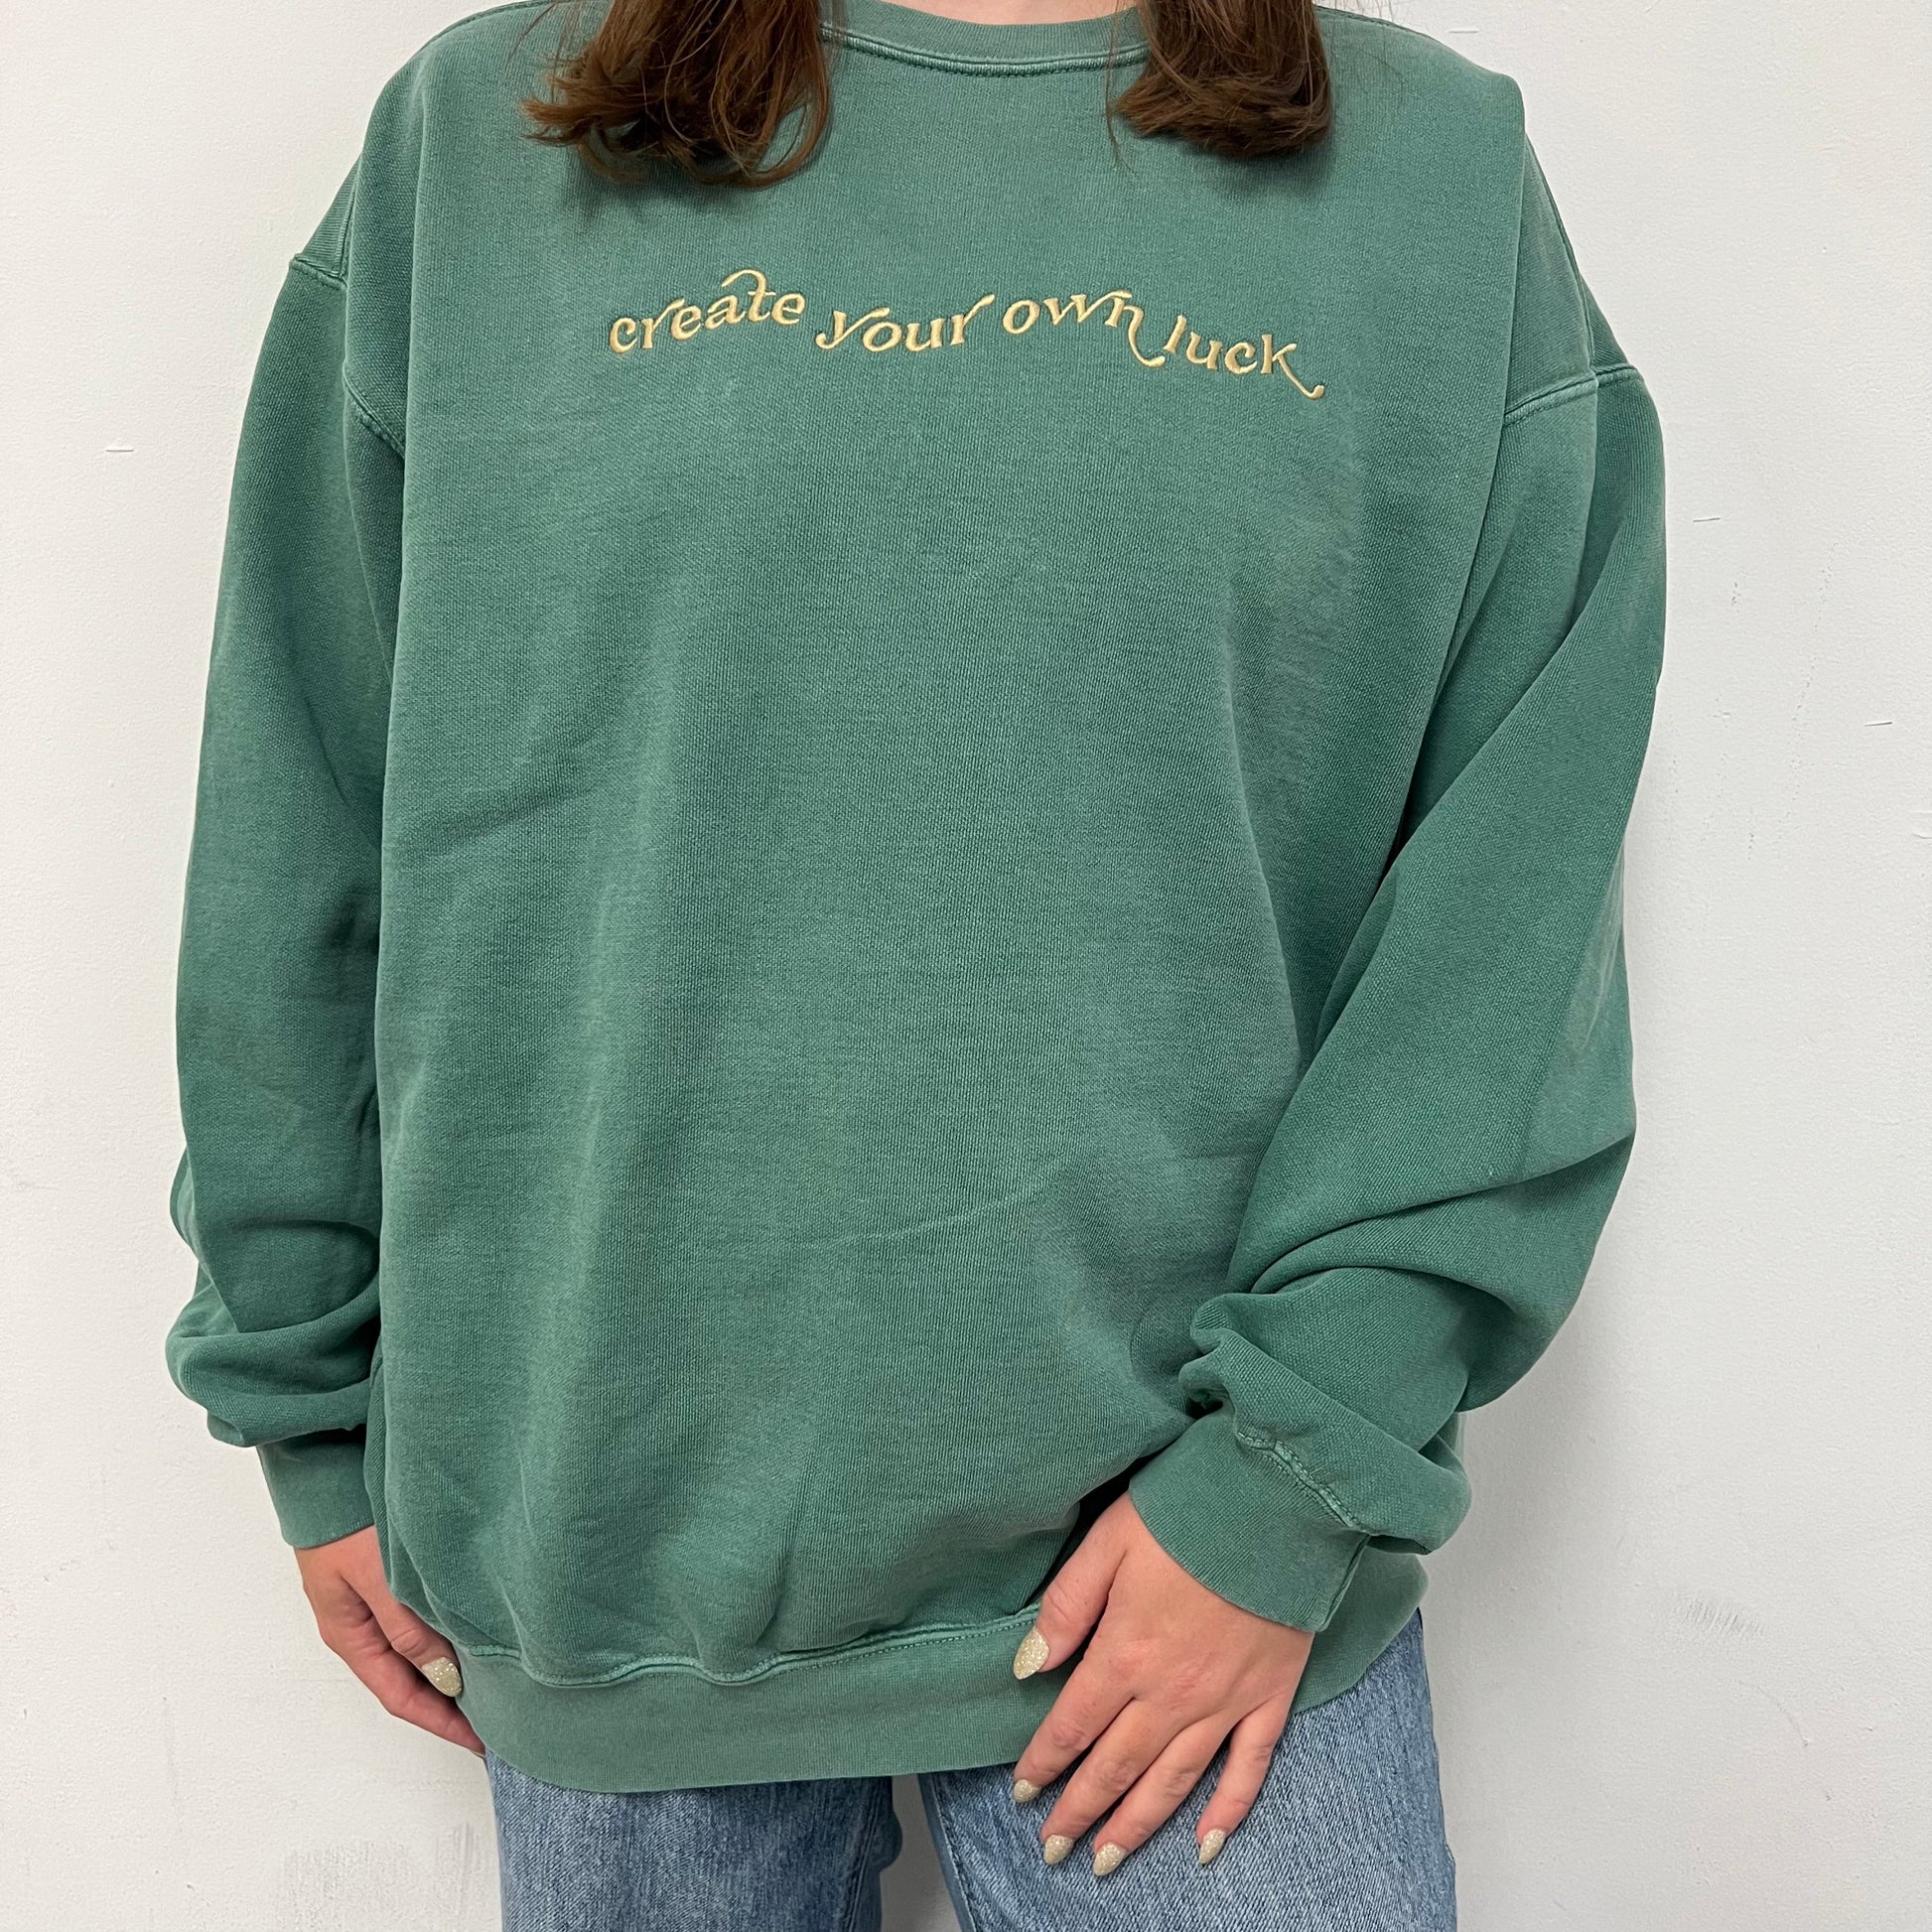 Maddie Luck Sweatshir Comfort Crewneck – Boutique Own Embroidered Green Green Luxe Create Your